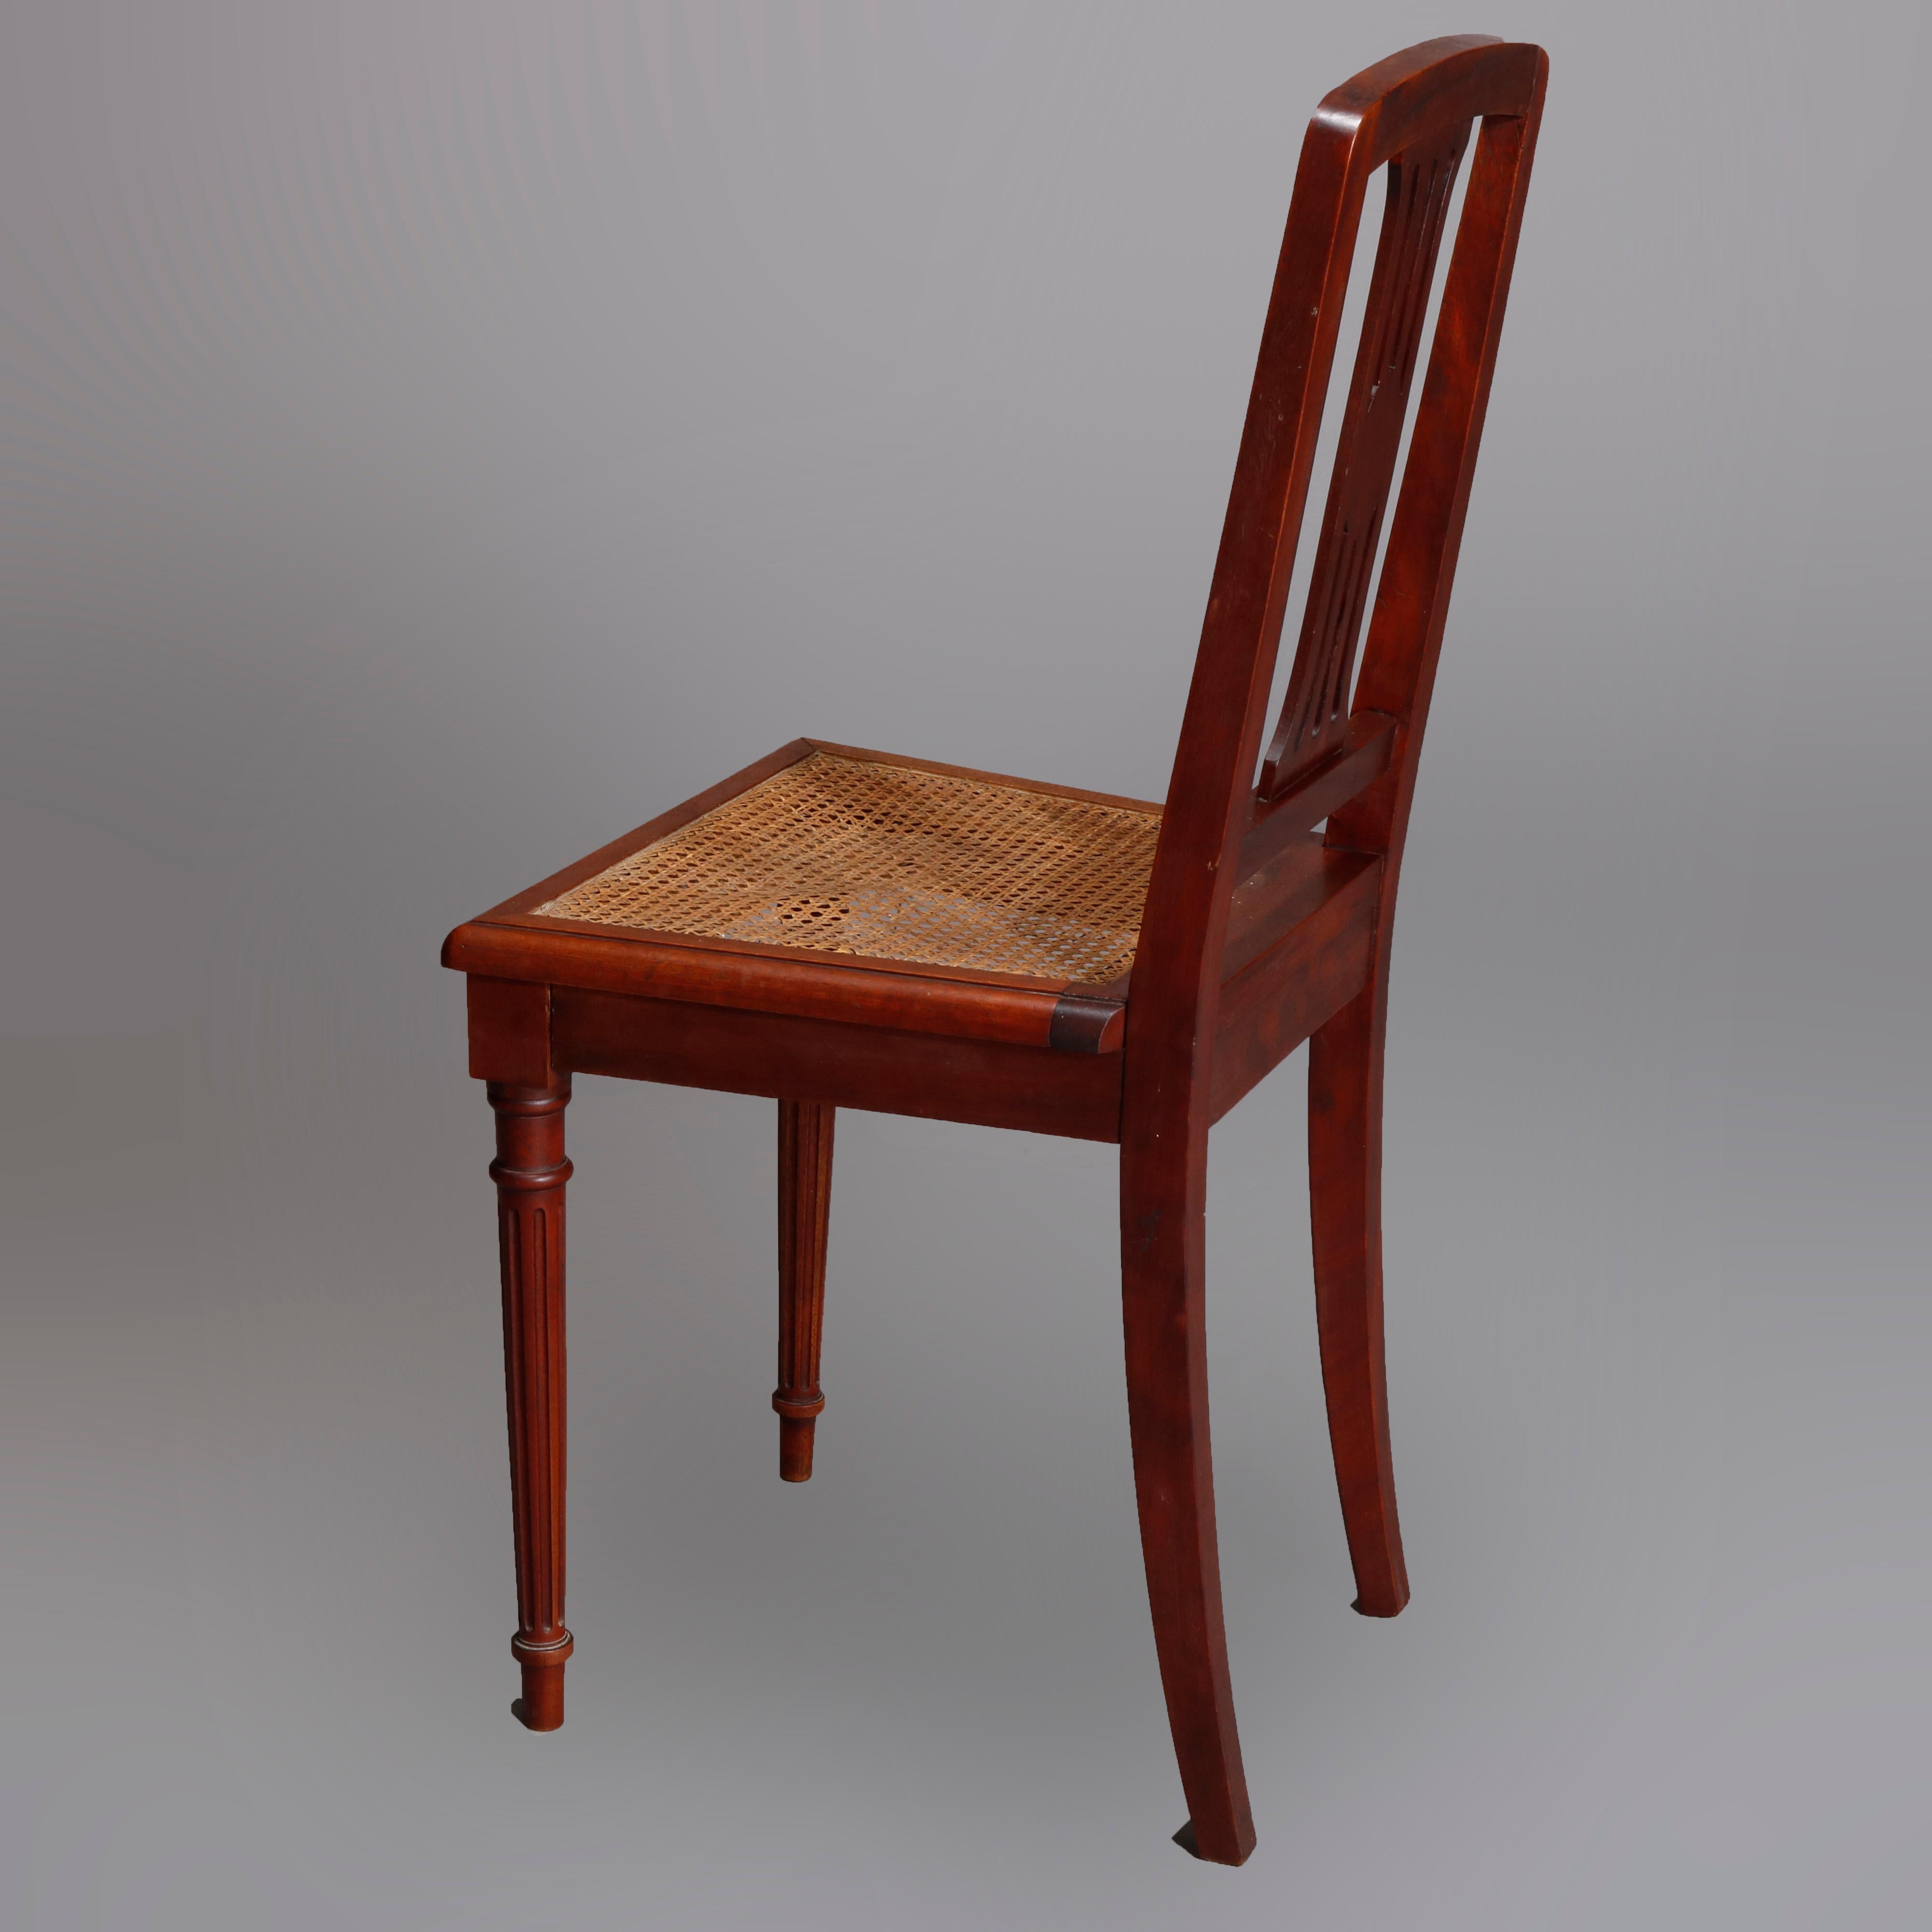 Six Antique French Louis XVI Mahogany Cane Seat Chairs, Early 20th Century For Sale 2